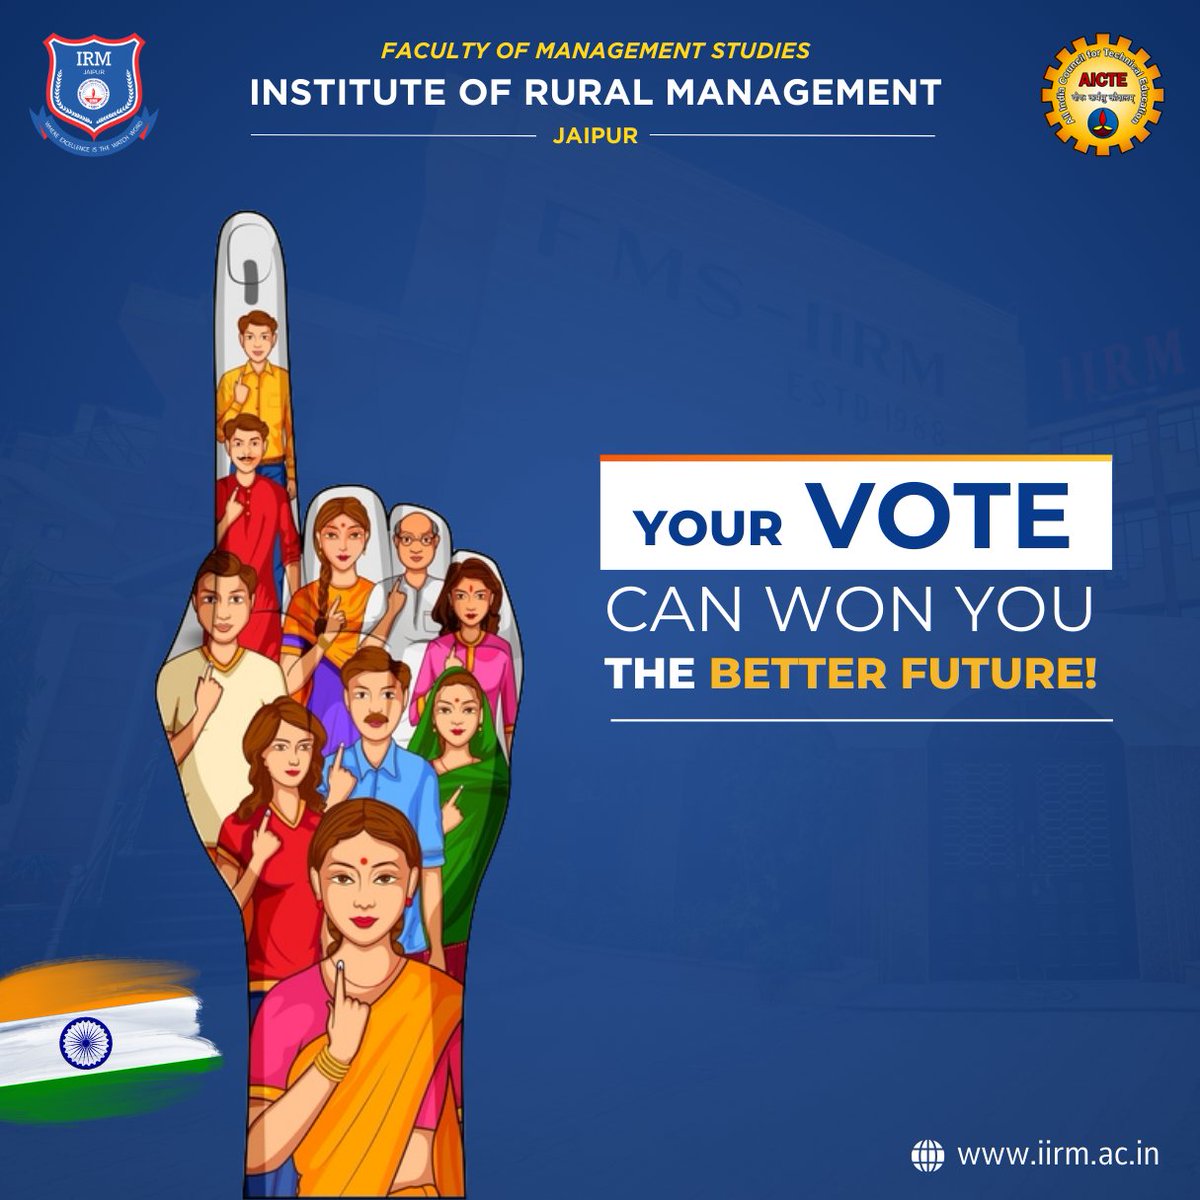 The power to change the future is in your hands! Don't miss the chance to cast your vote on 19 April 2024. Your voice matters!

#VoteForChange #YourVoiceMatters #DemocracyInAction #VotingDay2024 #Rajasthan  #Loksabha #Loksabhaelection #India #VotingRights #IIRM #FMS